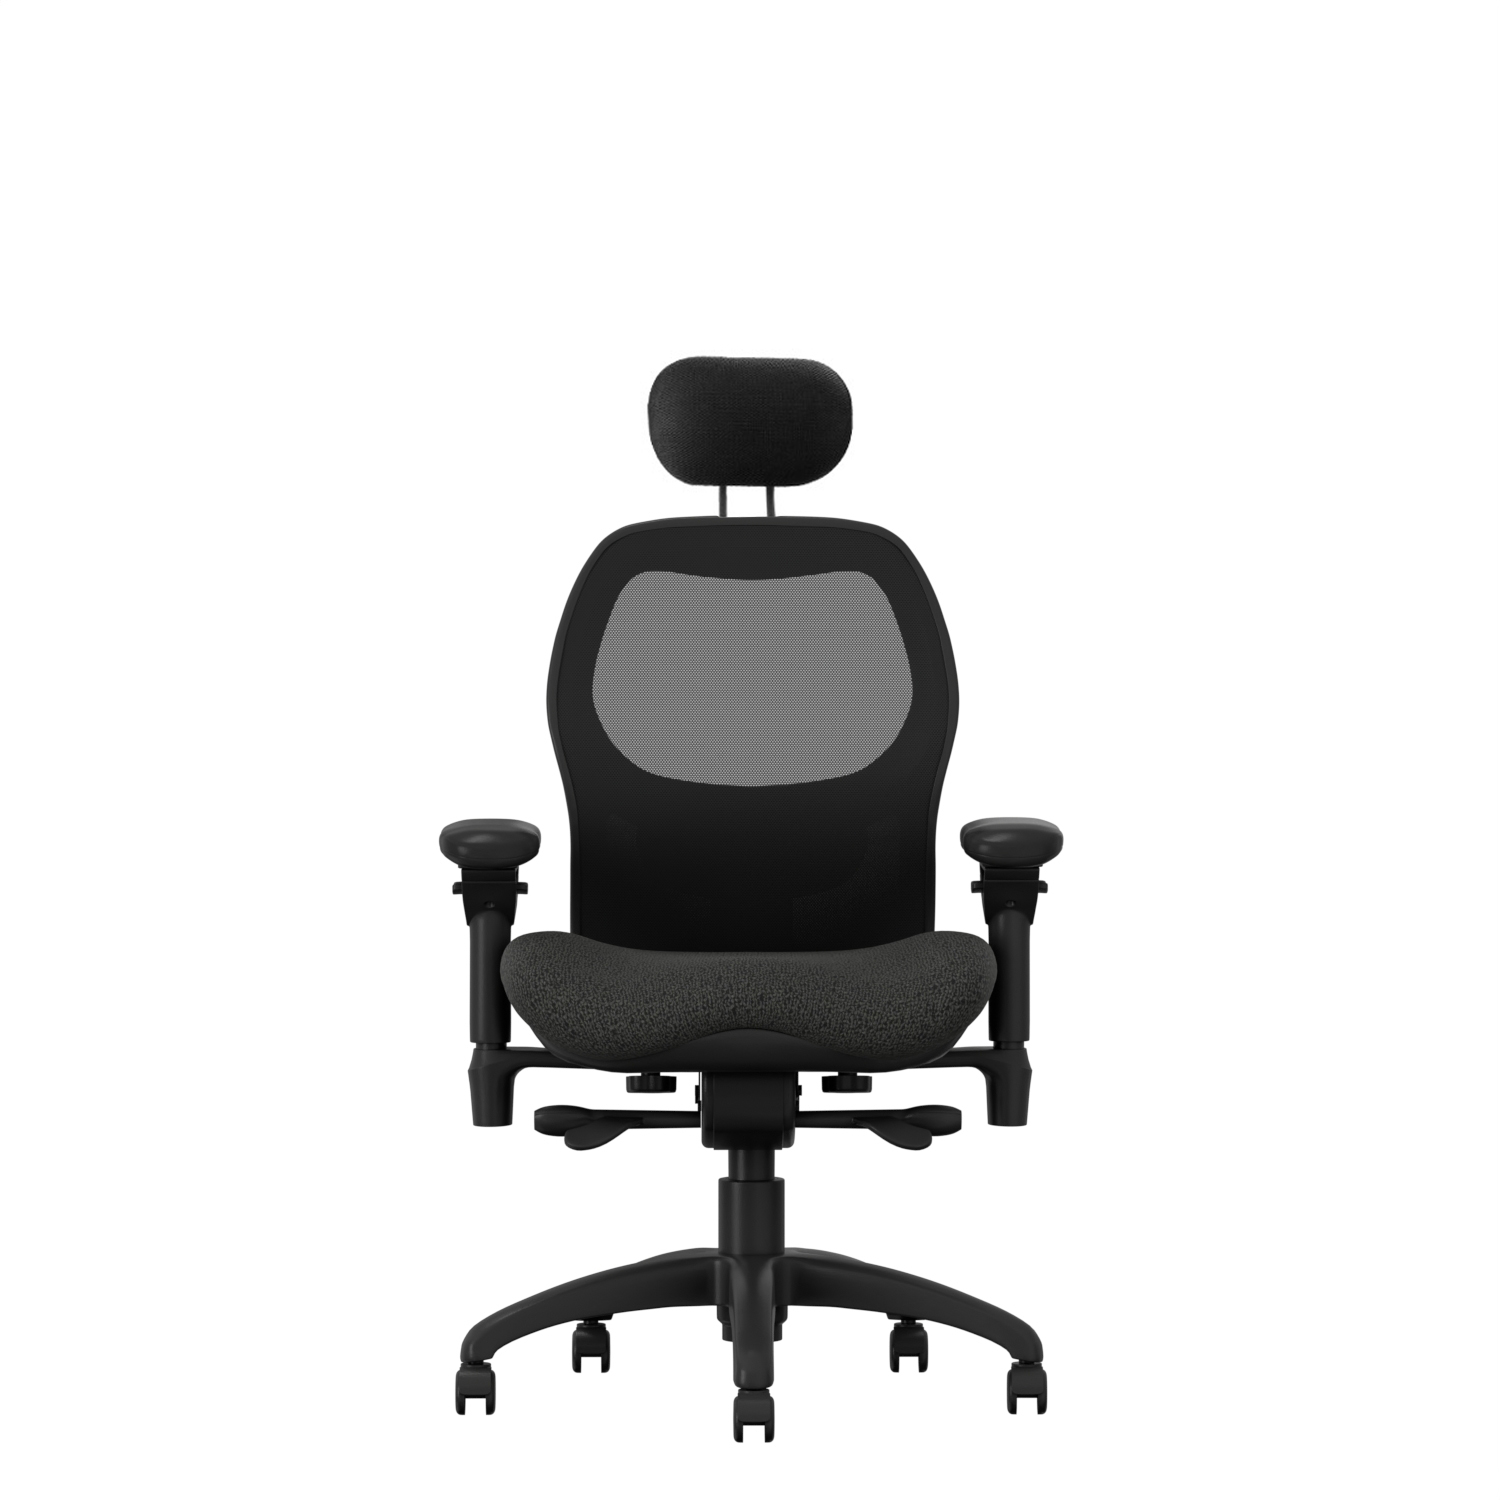 Sola 3600 Series – Executive Task Chair Contoured Seating